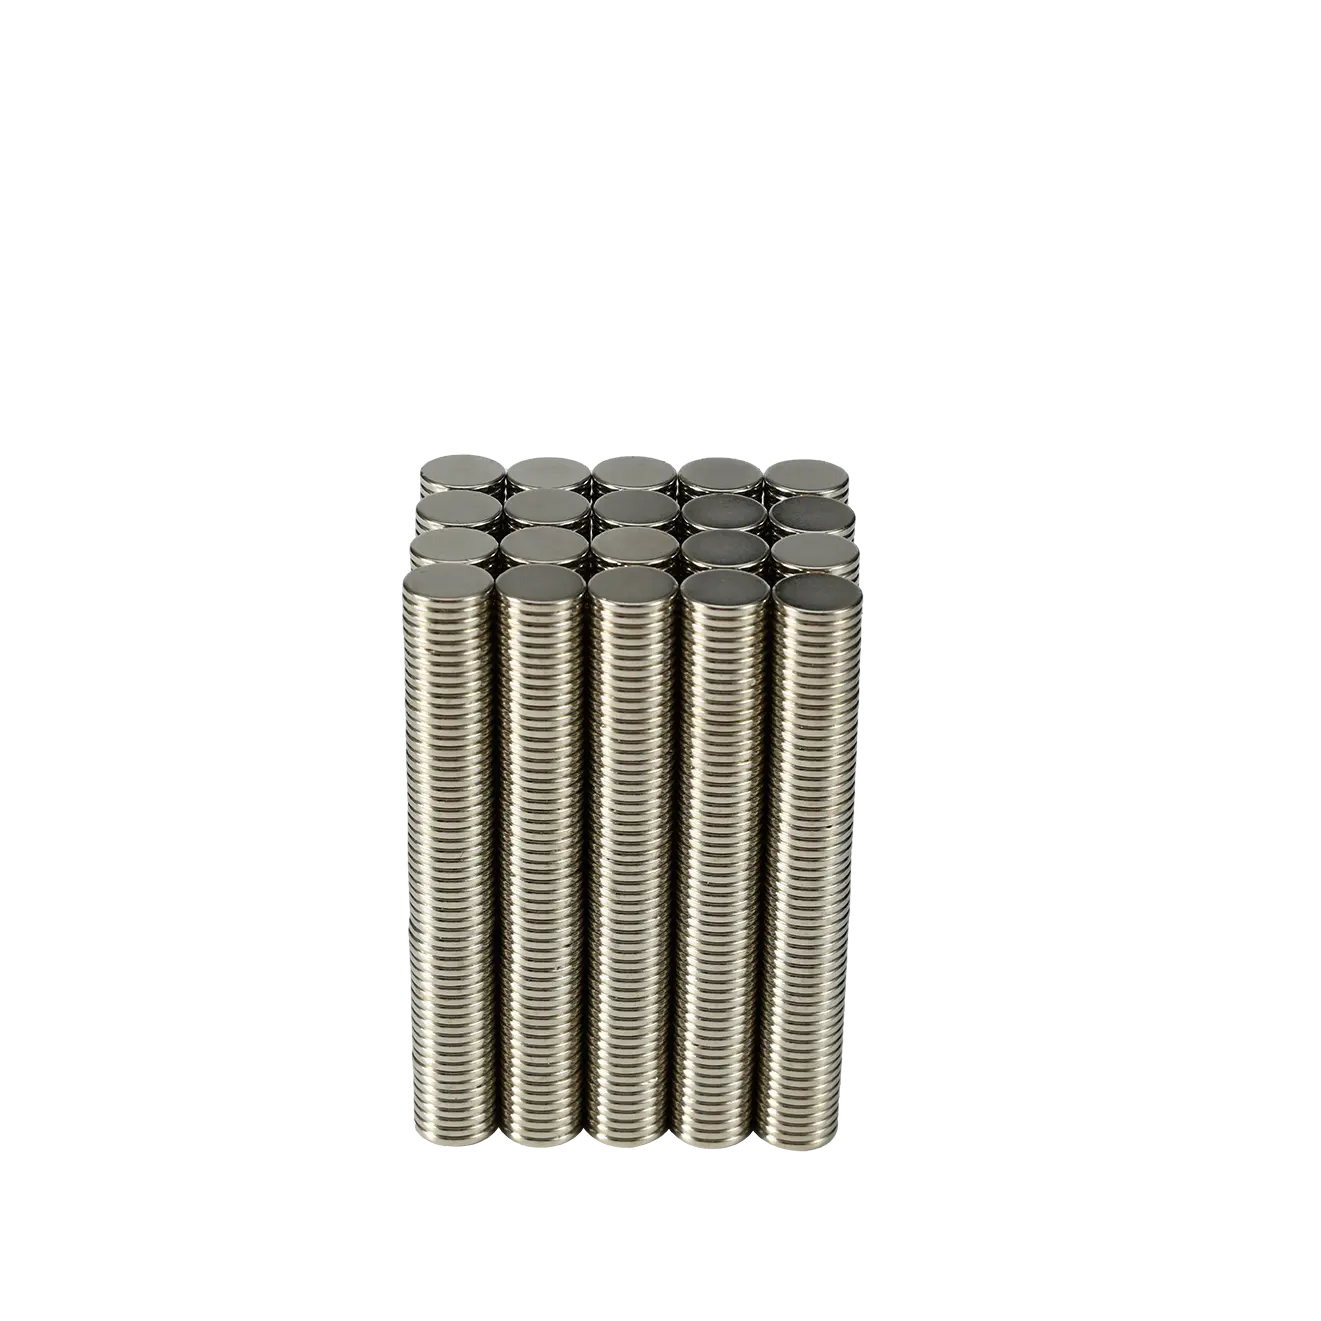 Wholesale of magnetic materials by suppliers  strong magnets  neodymium blocks  magnetic cubic N35 magnets